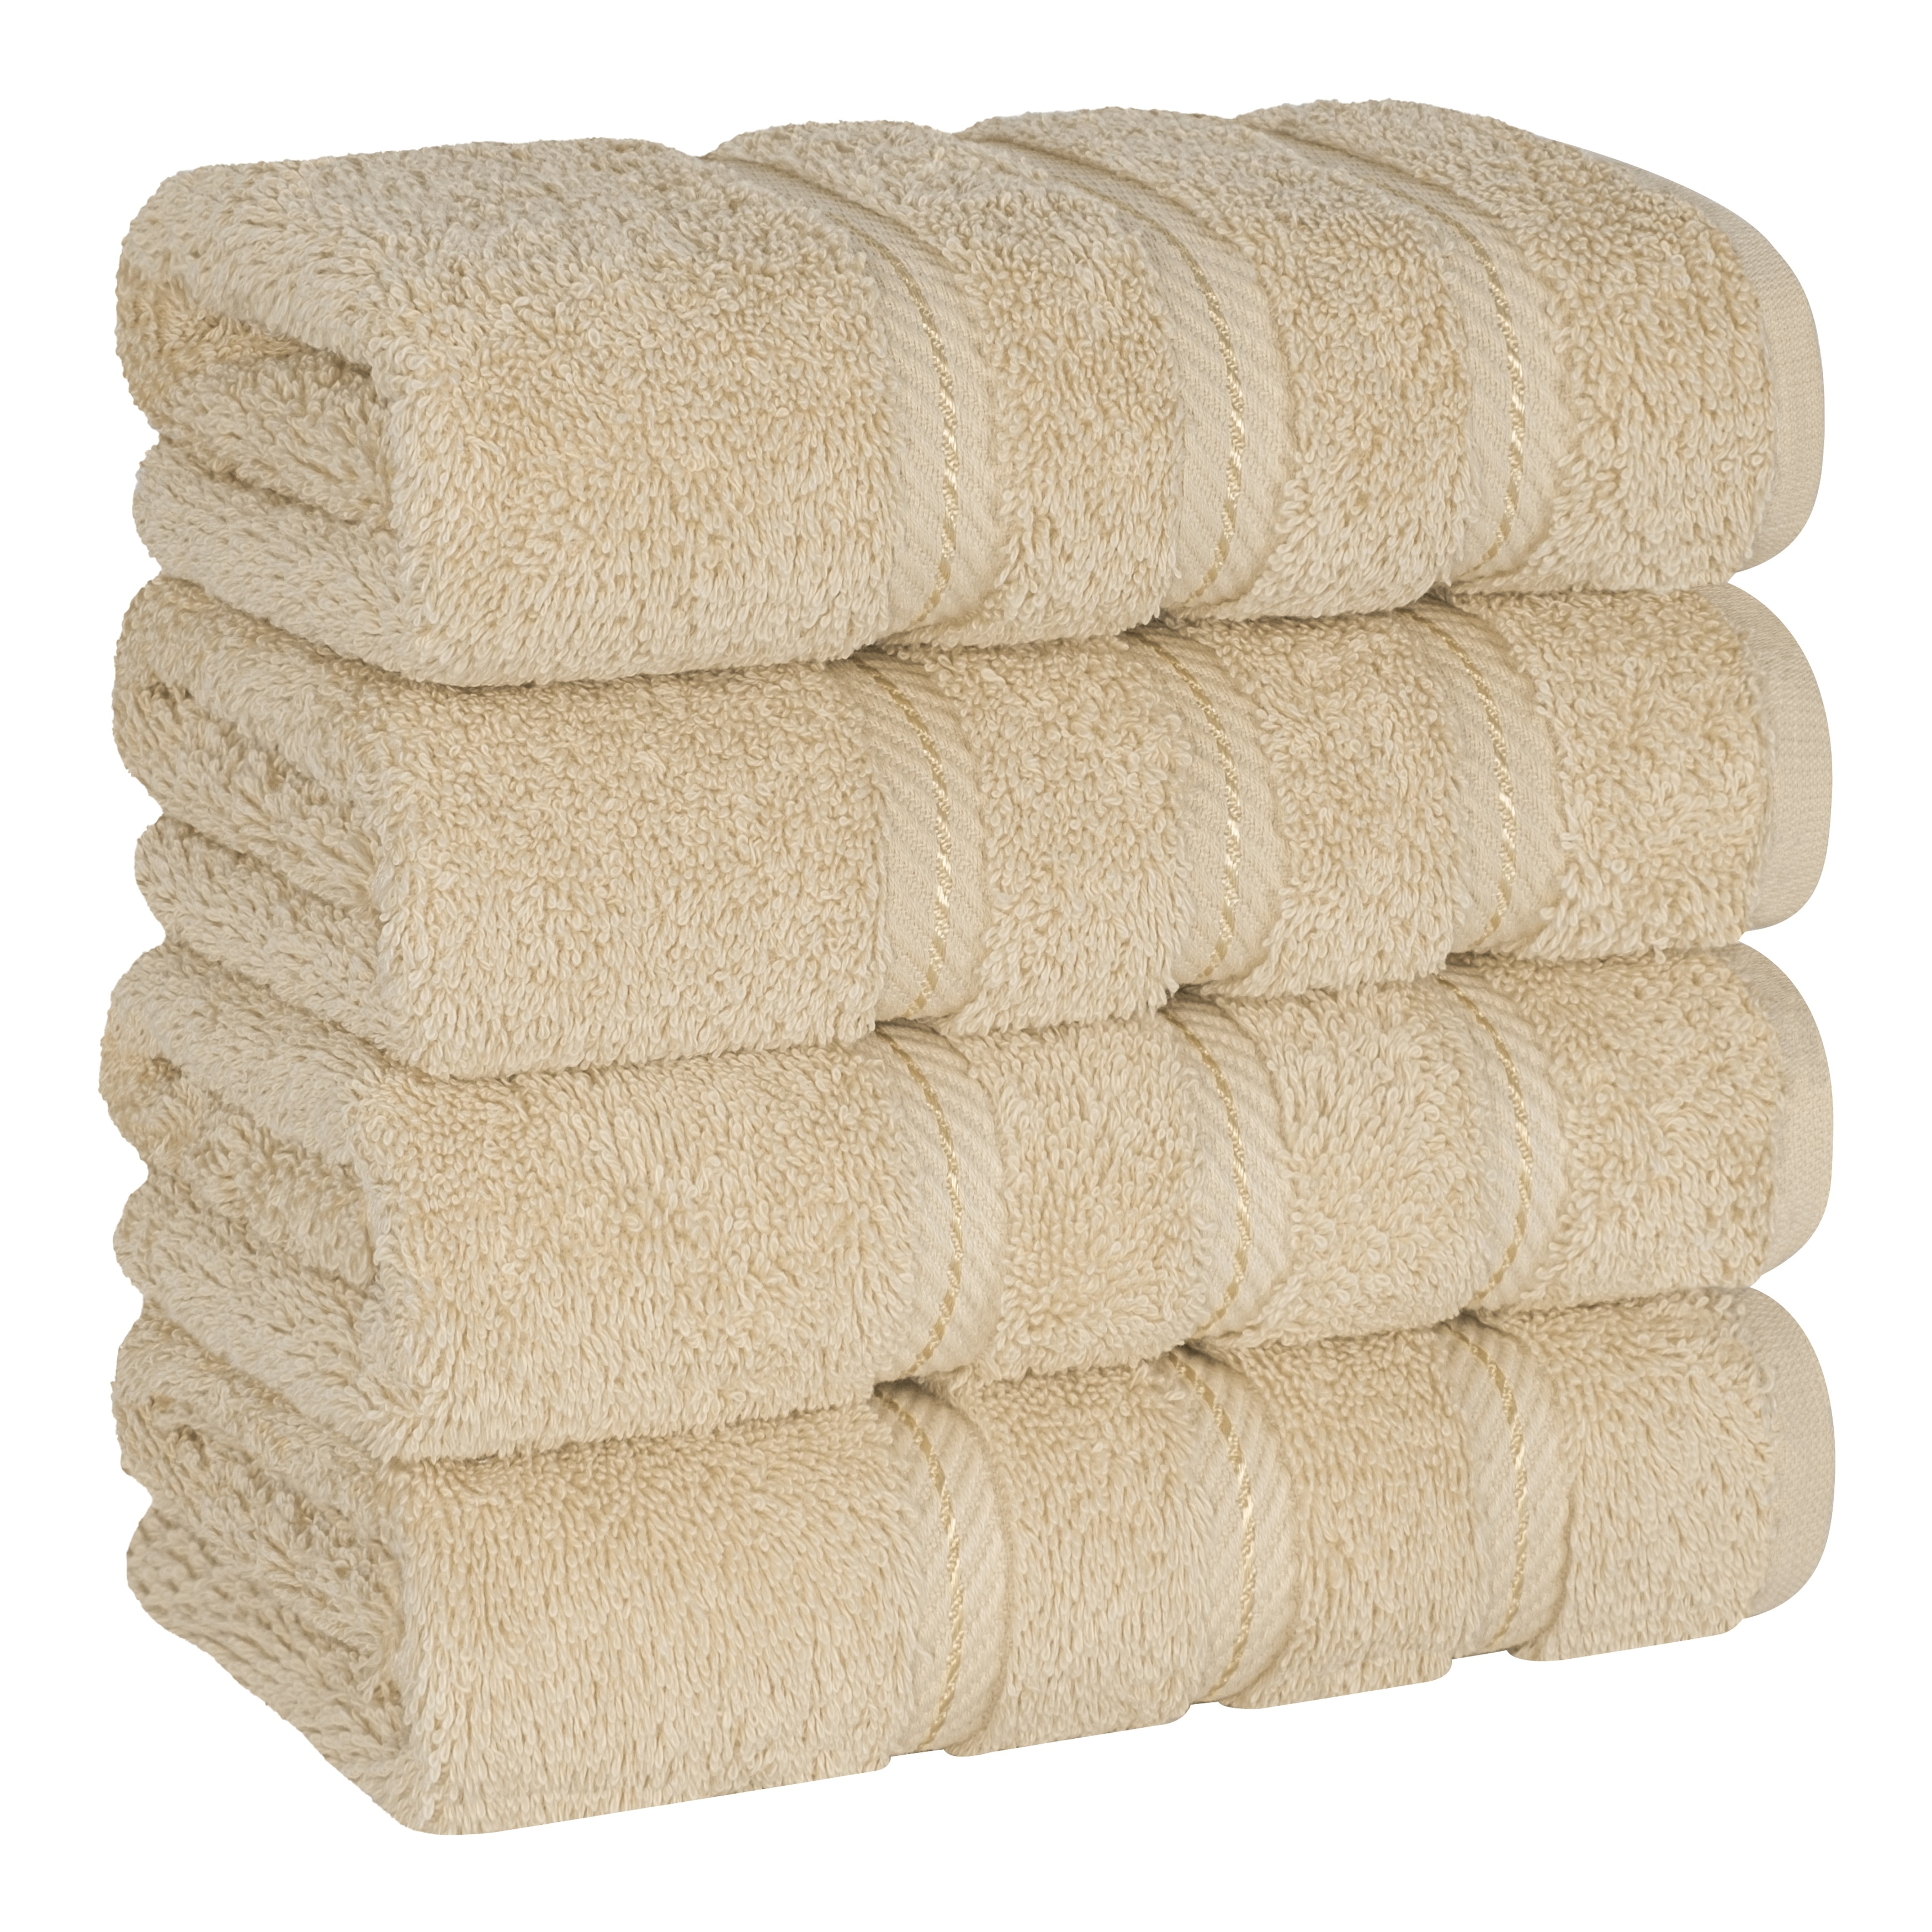 https://ak1.ostkcdn.com/images/products/is/images/direct/43479ae4d320ac76bd25a854f9df56ba42e70258/American-Soft-Linen-4-Piece-Turkish-Hand-Towel-Set.jpg